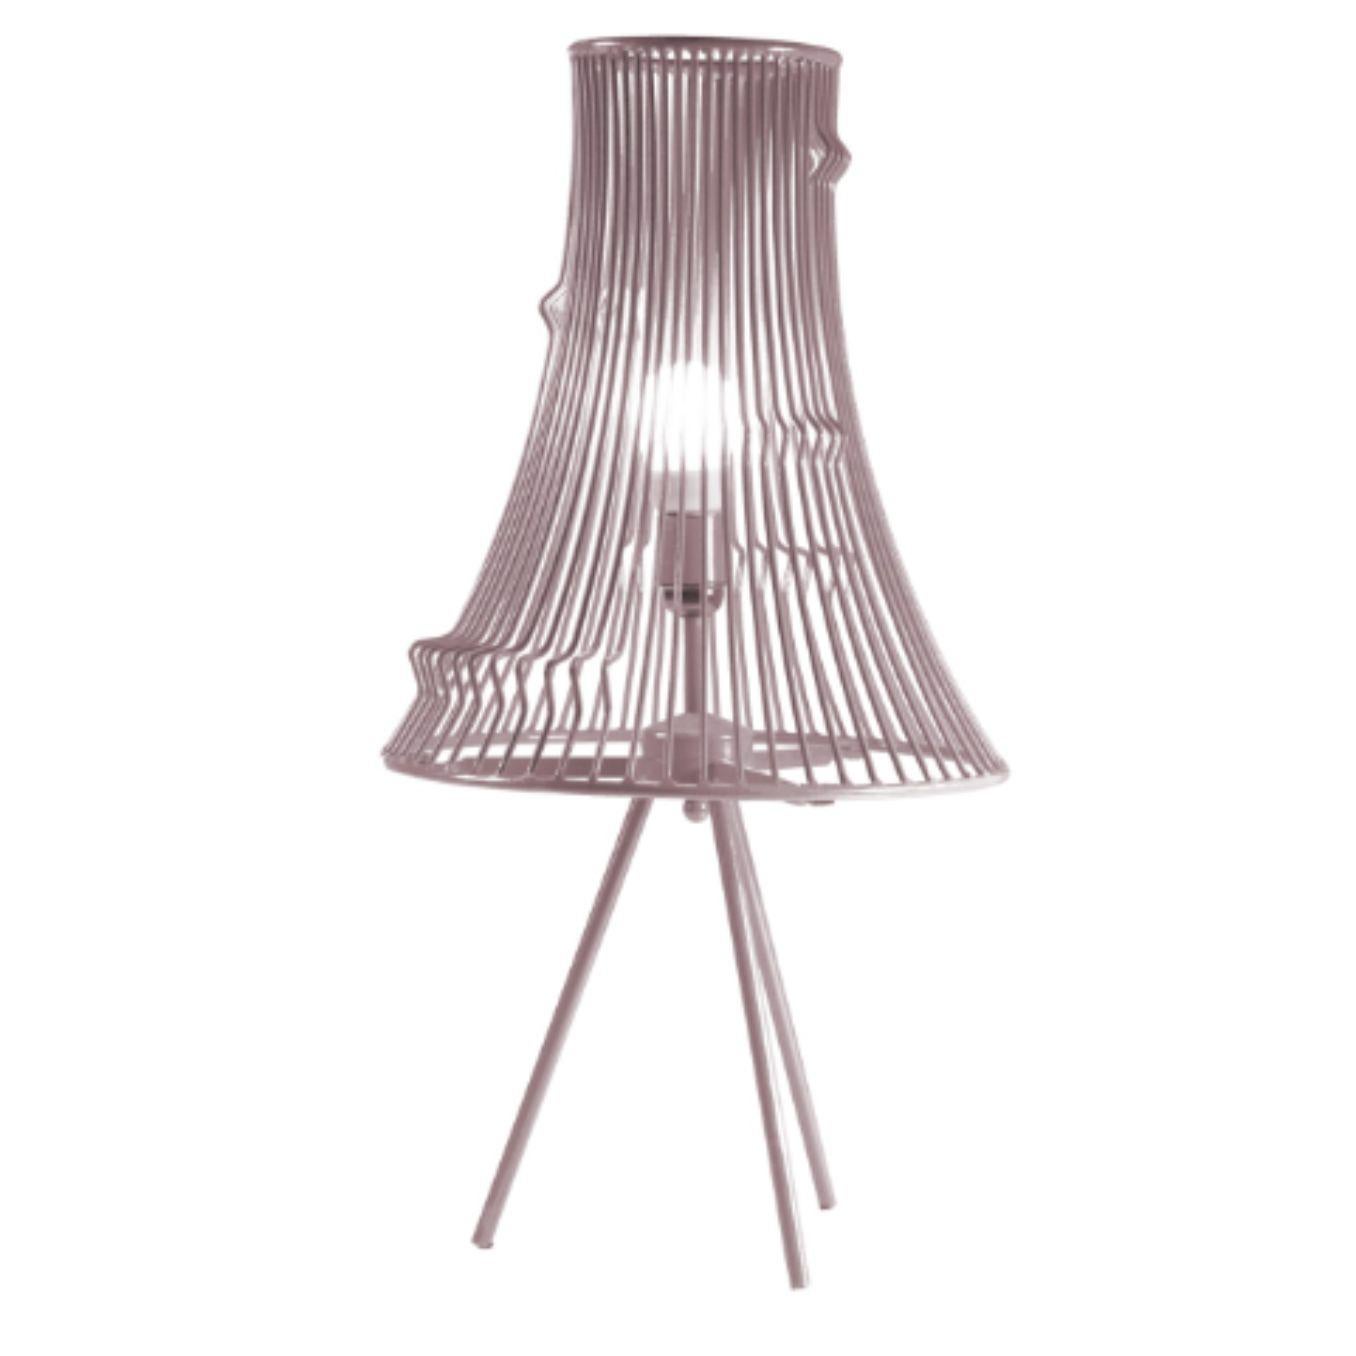 Lilac extrude suspension lamp by Dooq.
Dimensions: W 34x D 34 x H 70 cm.
Materials: lacquered metal
Also available in different colors and materials.

Information:
230V/50Hz
E27/1x10W LED
120V/60Hz
E26/1x7W LED
bulb not included



Dooq is a design